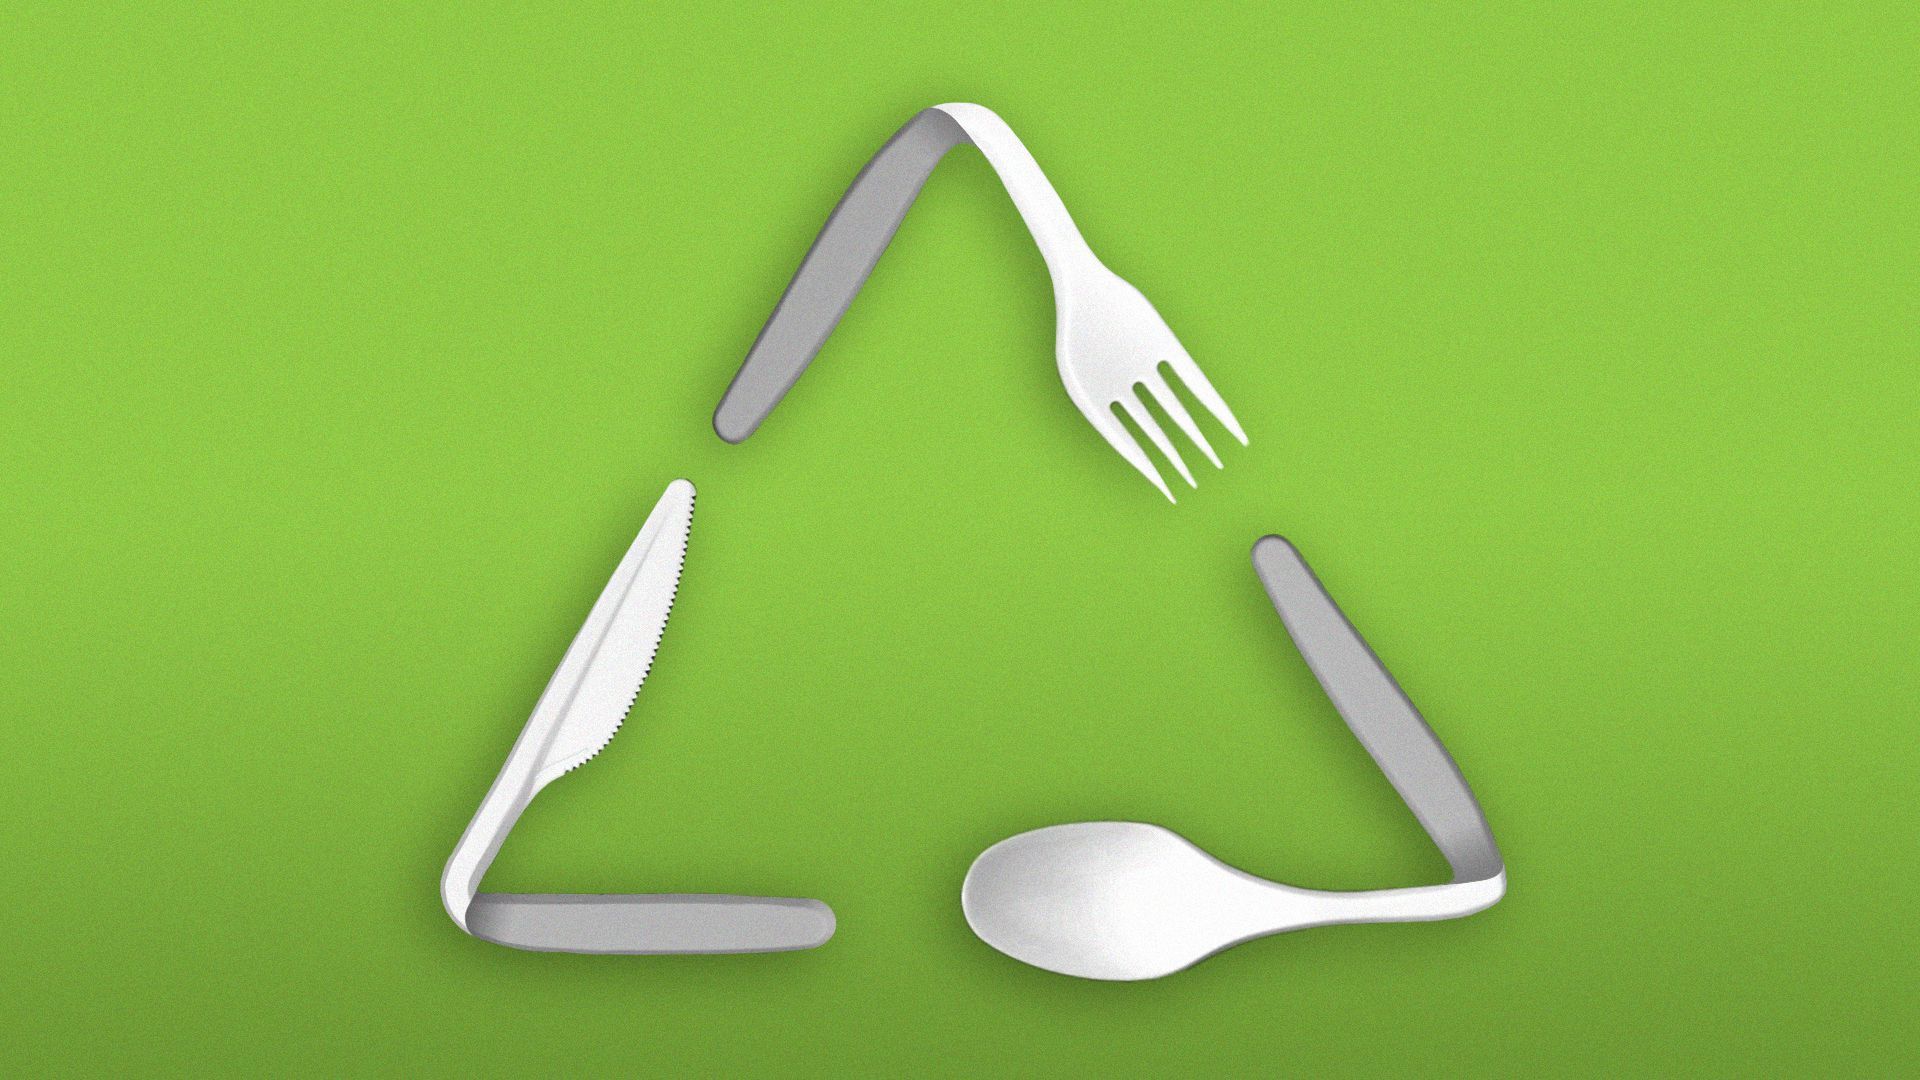 Recycling symbol made of plastic utensils